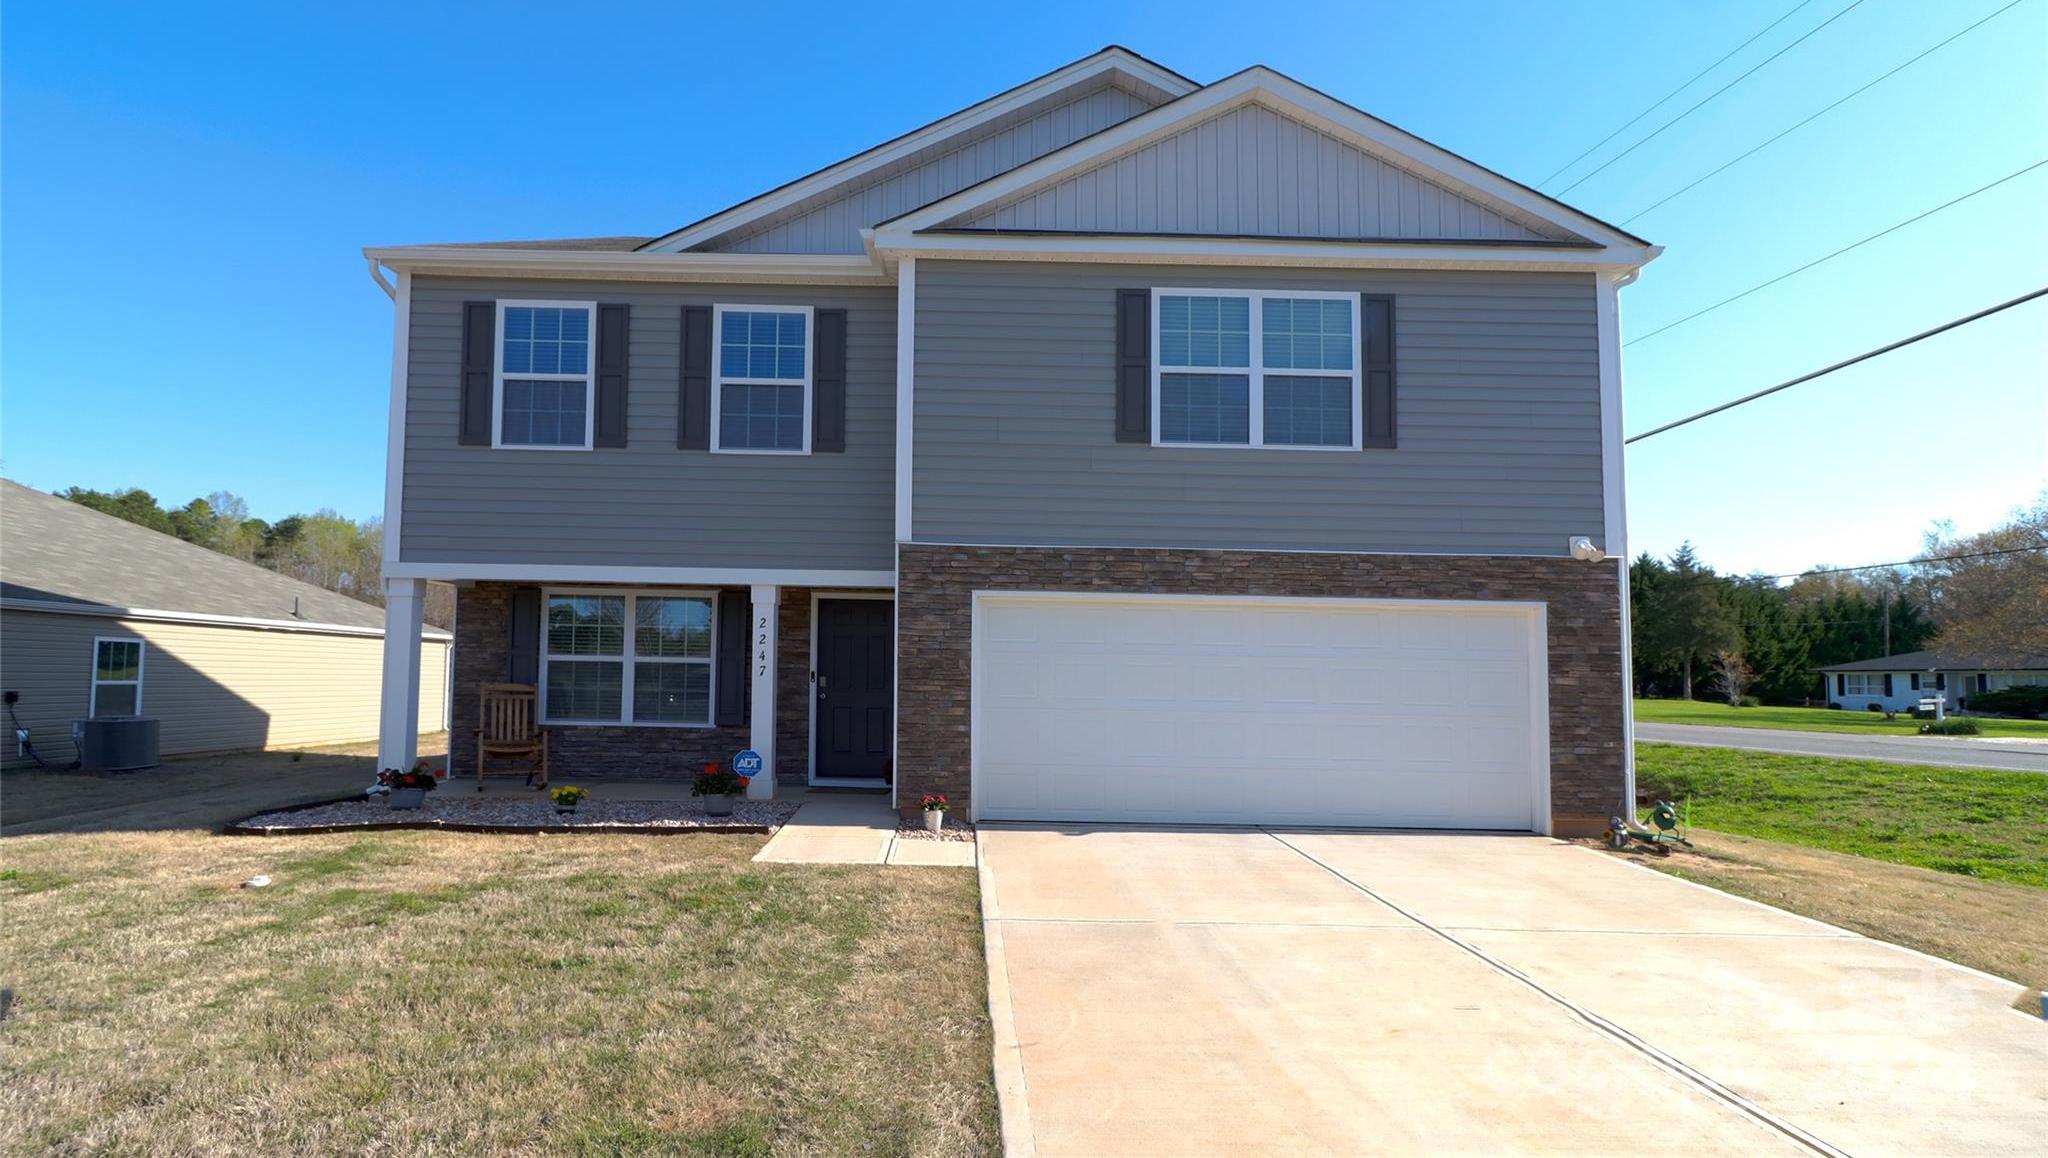 Photo one of 2247 Meadow Stream Dr Sherrills Ford NC 28673 | MLS 4123511